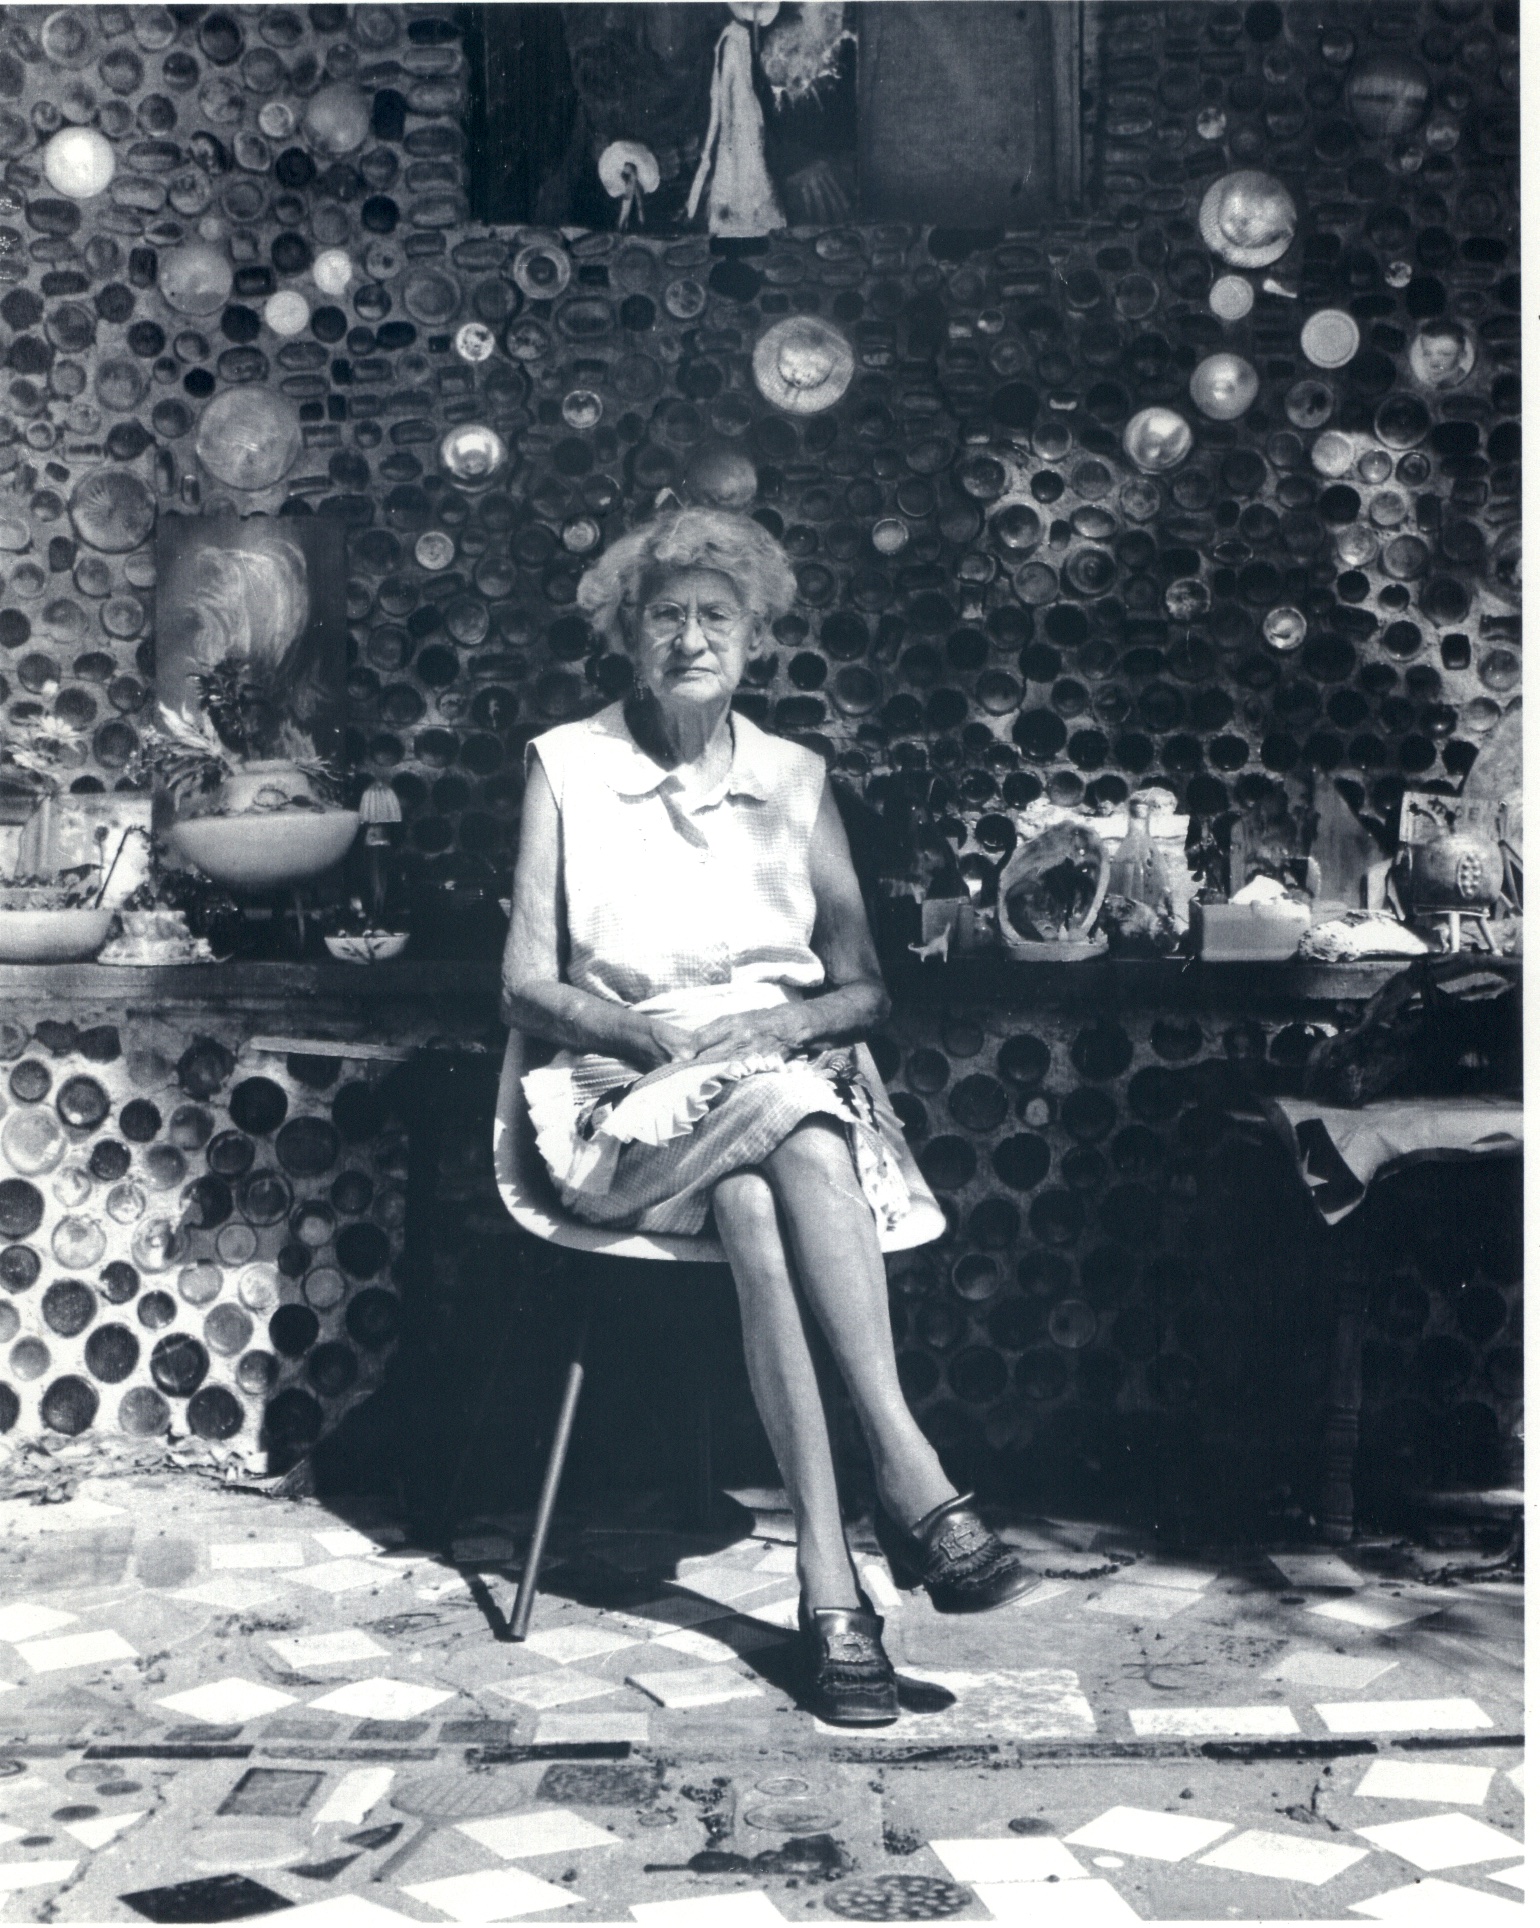 Black-and-white photograph of an elderly white woman wearing a short dress and glasses, seated in front of a structure made from glass bottles